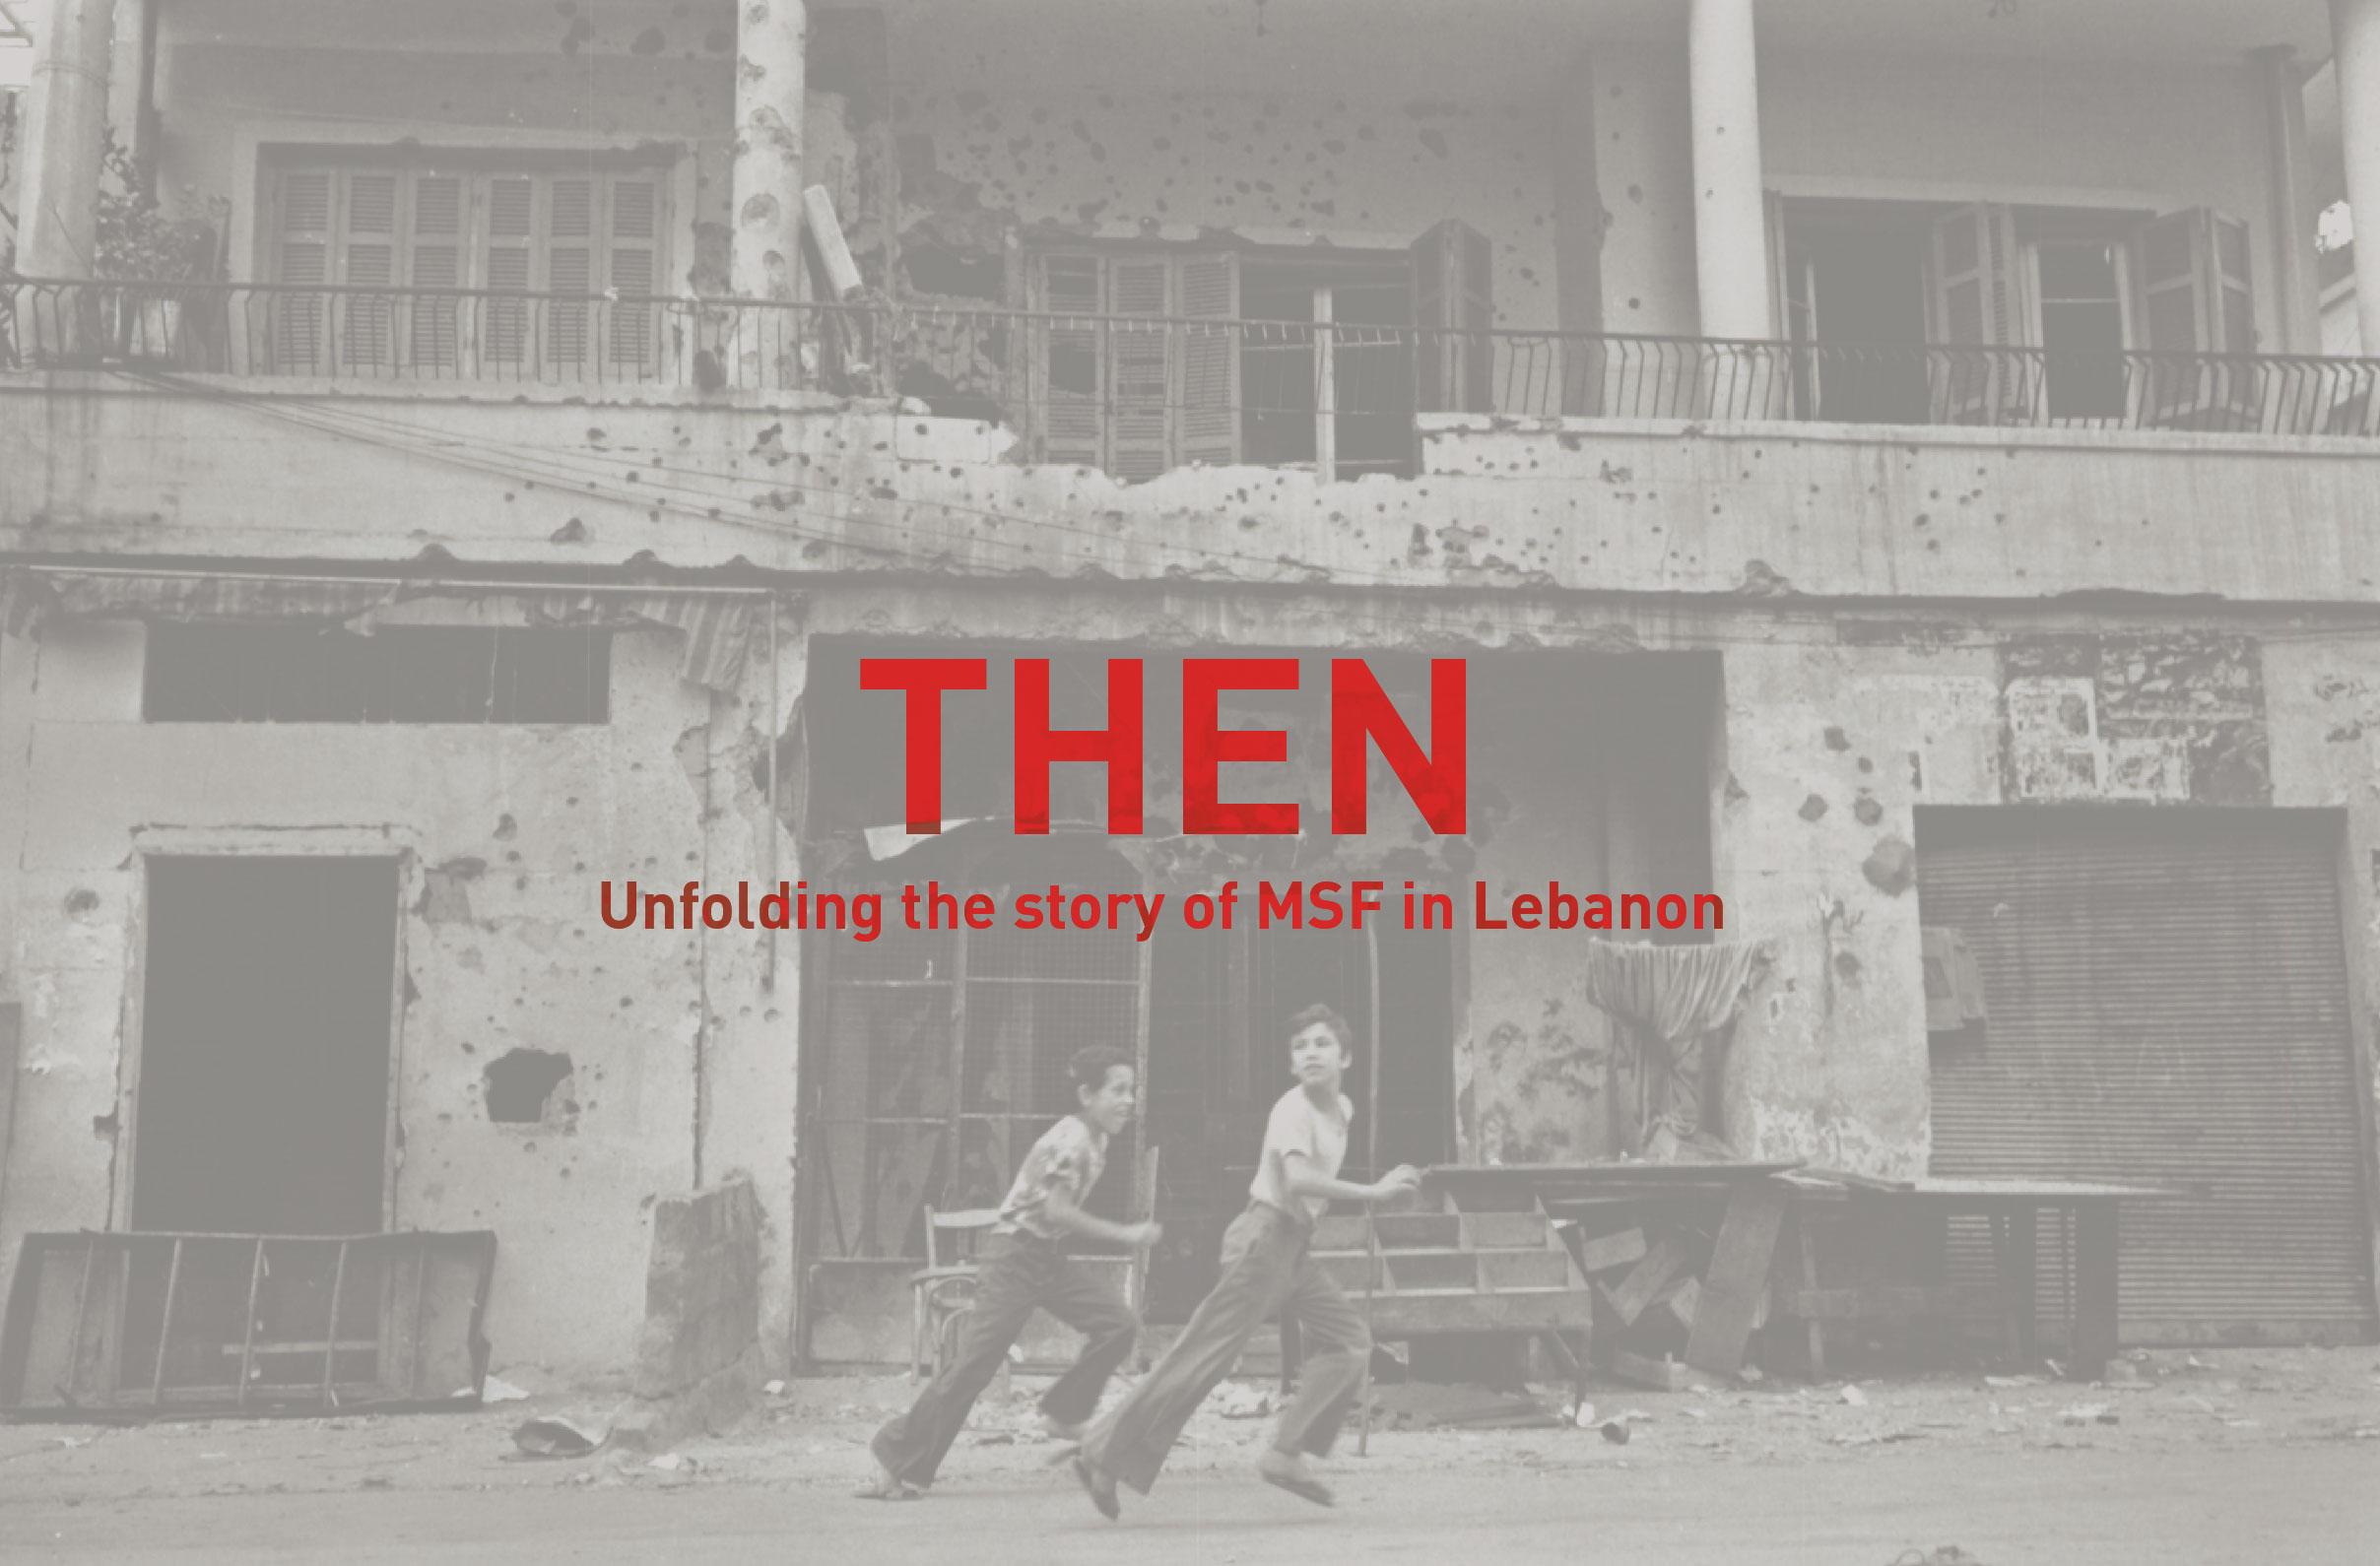 THEN: Unfolding the story of MSF in Lebanon